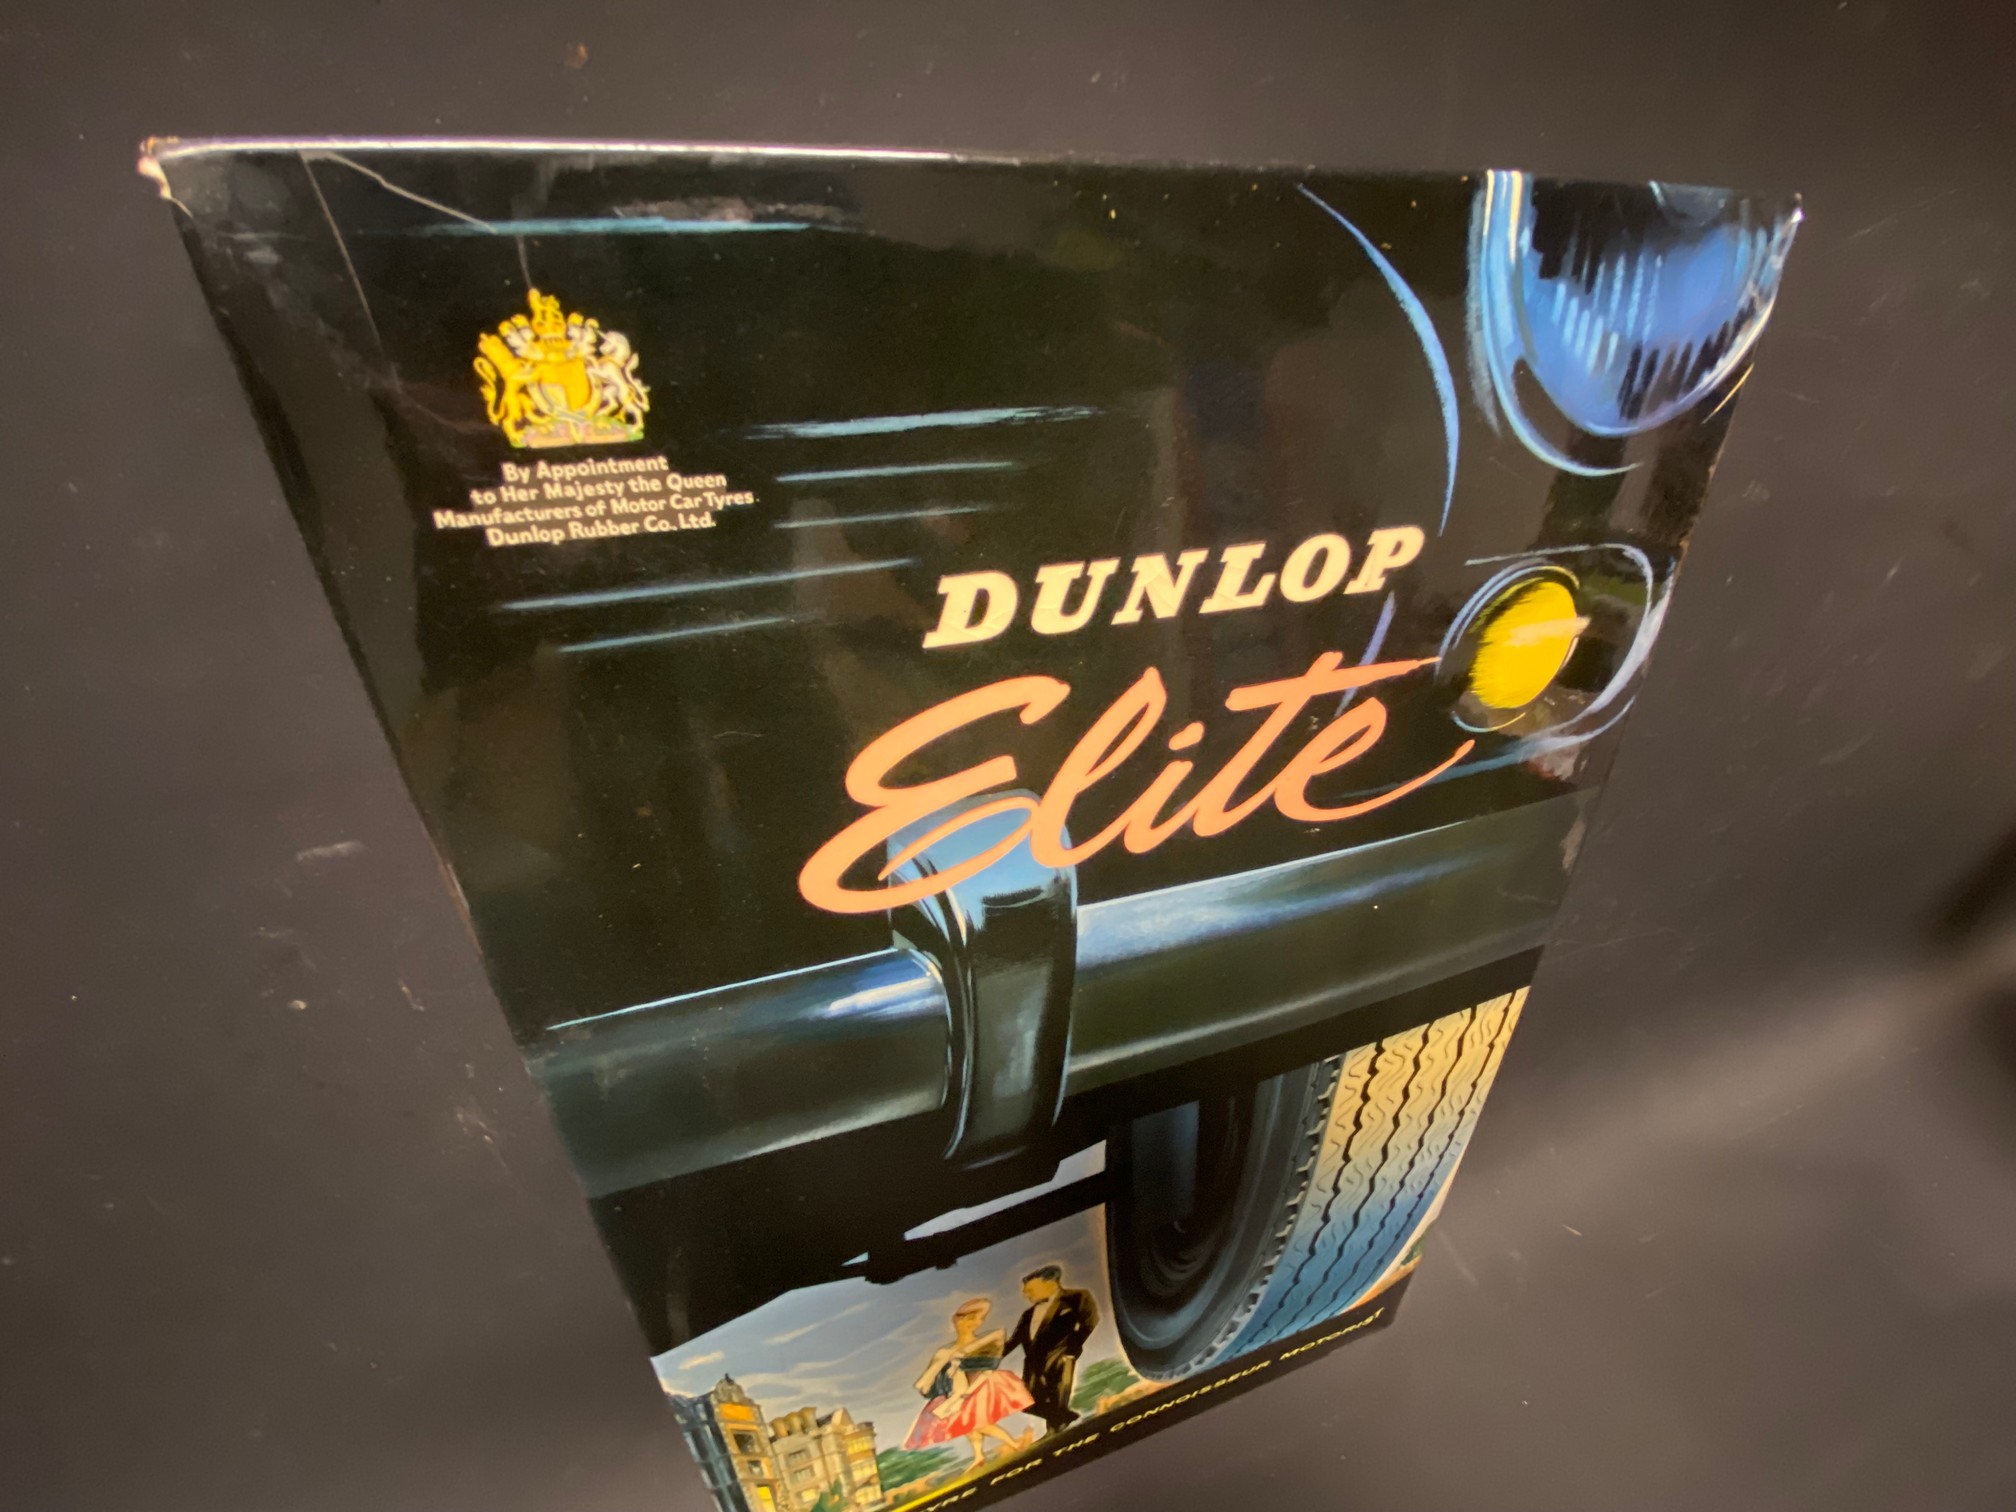 A Dunlop Elite pictorial showcard depicting a Mk. I Mini to the front, 10 x 15". - Image 3 of 5